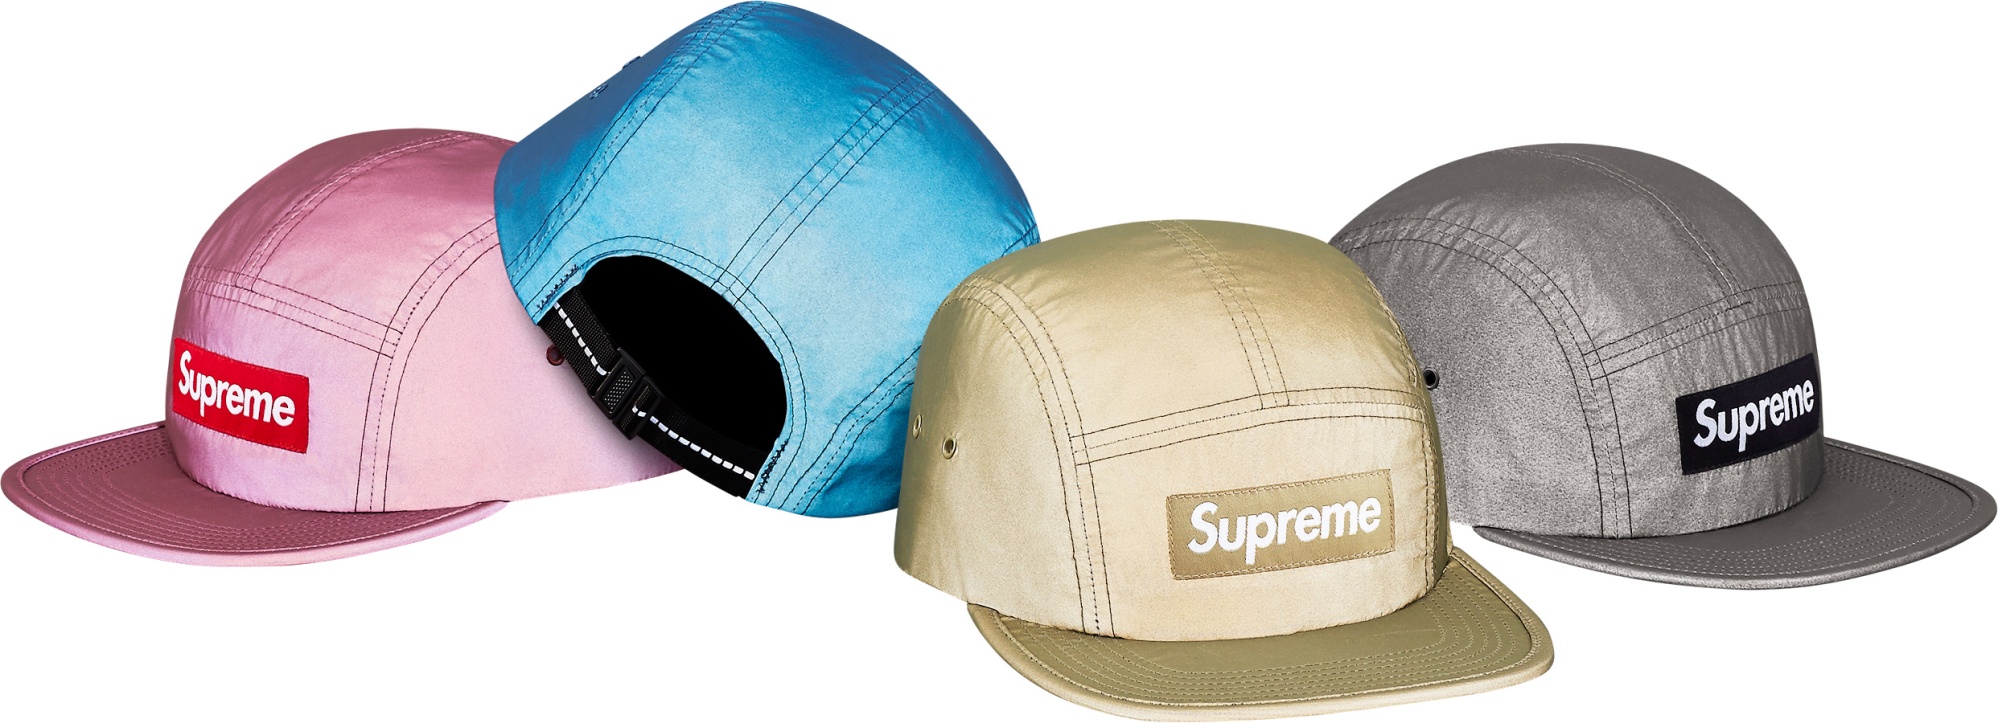 Best items from Supreme’s upcoming SS17 Season | Street Essence